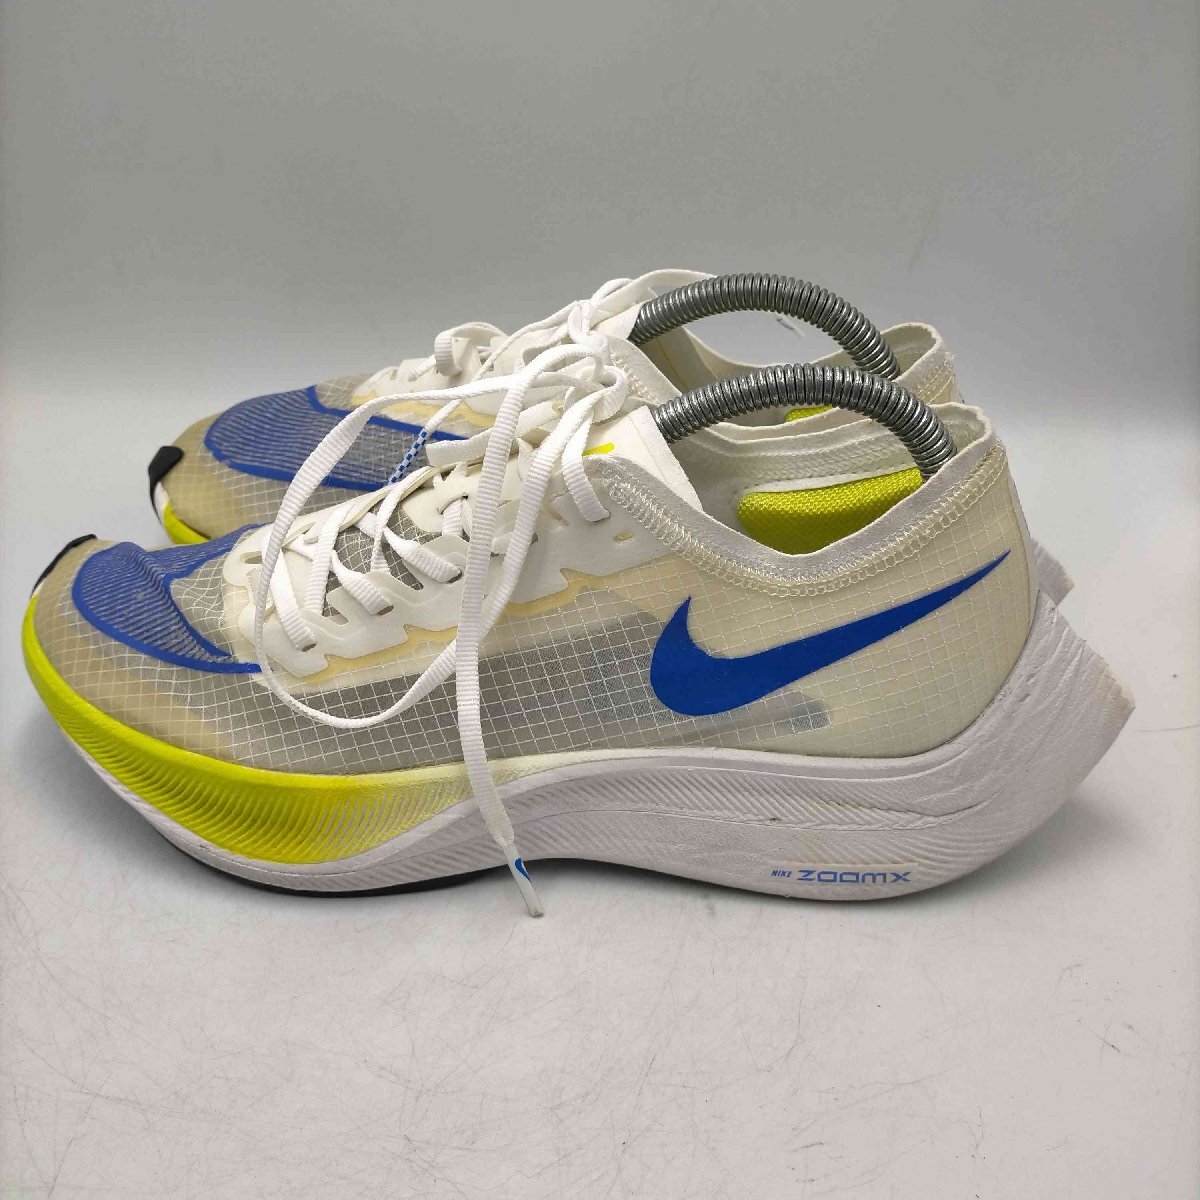 NIKE(ナイキ) ZOOMX VAPORFLY NEXT% ズーム エックス ヴェイパーフライ ネクスト 中古 古着 0525の画像2